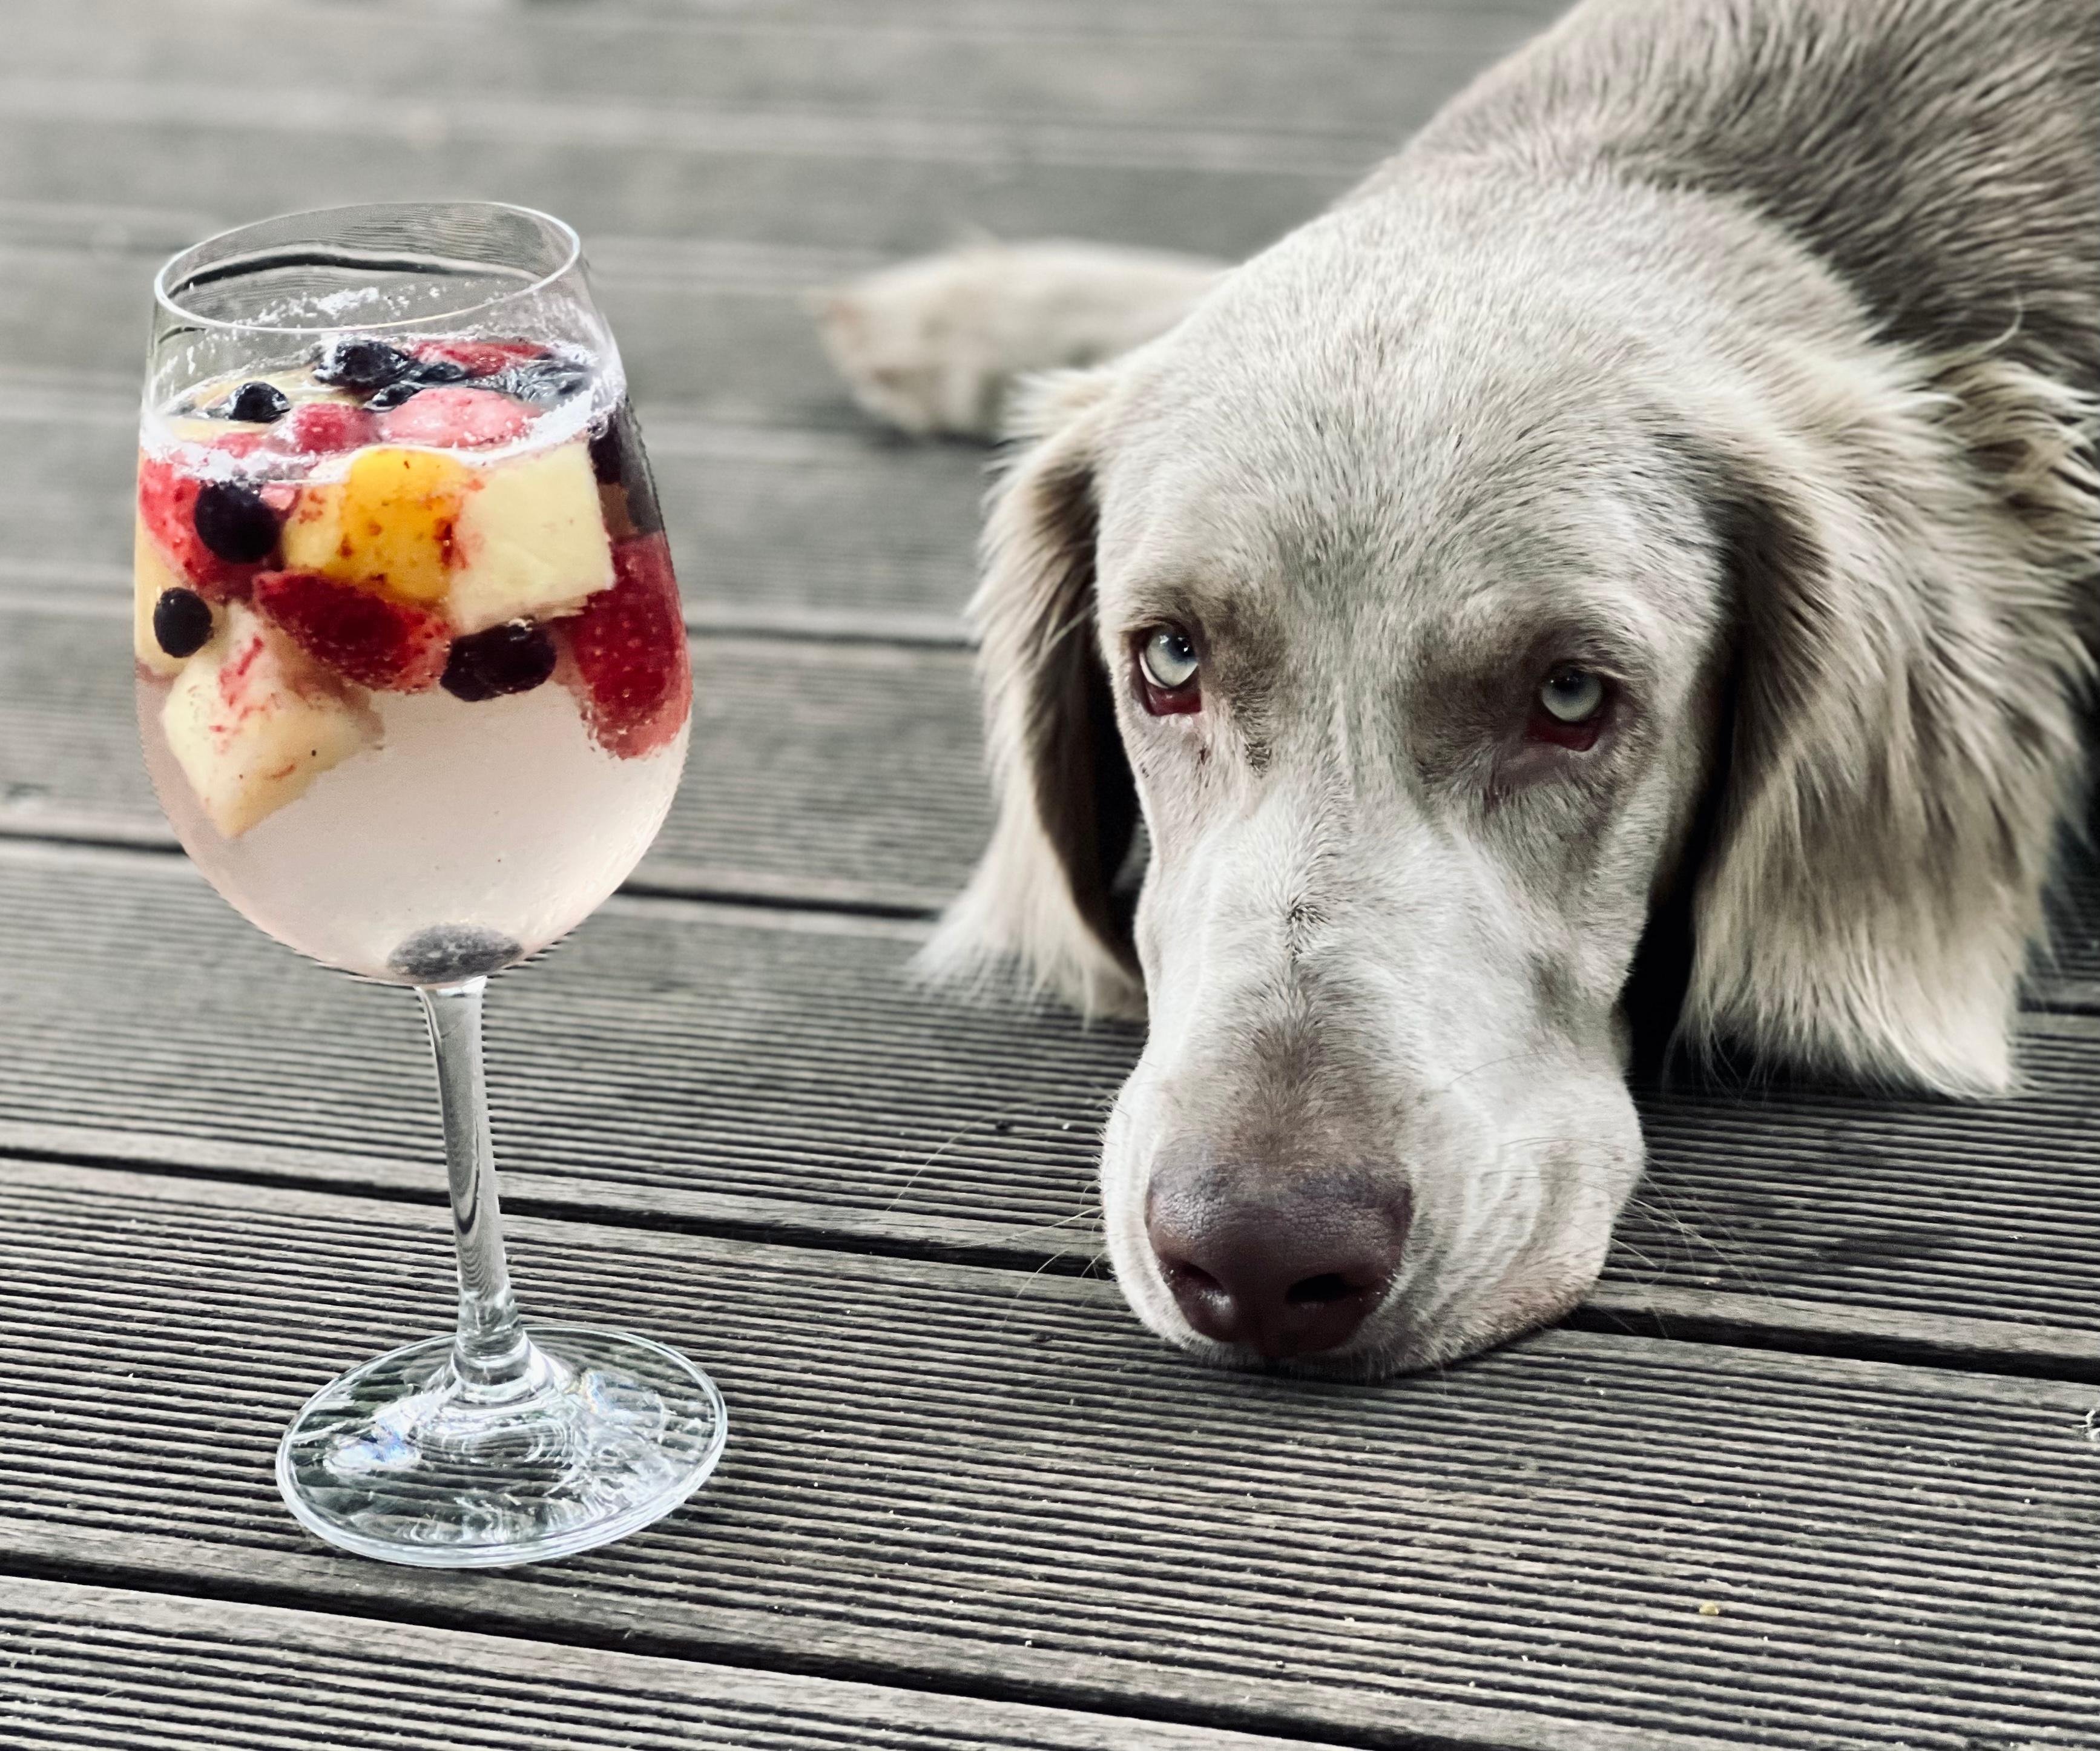 #Cocktail#Hund#Drink 

Don’t drink and drive!